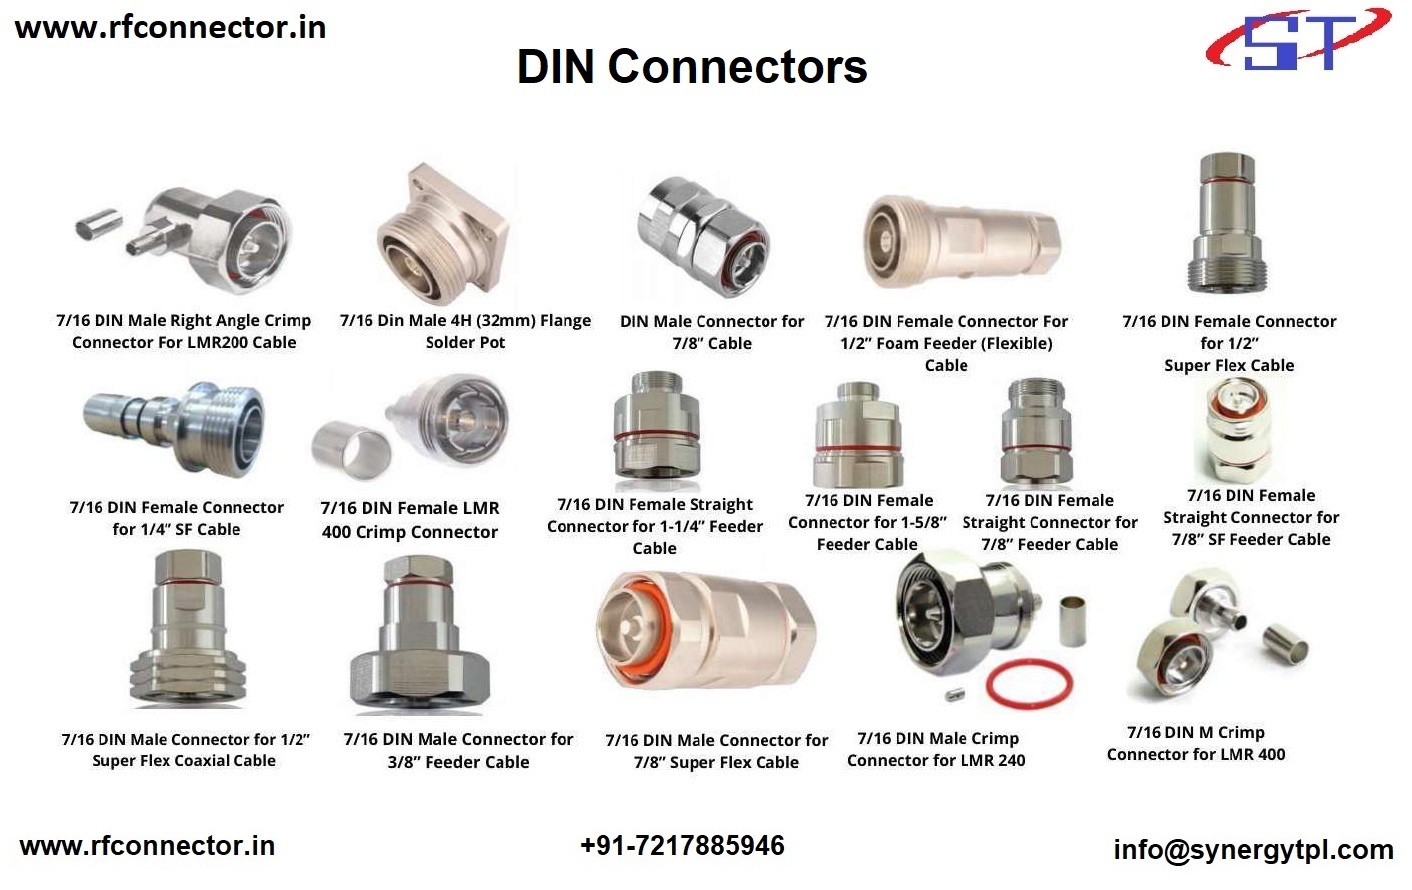 DIN Male RIGHTANGLE FOR 1-2 SUPERFLEX CLAMP CONNECTOR